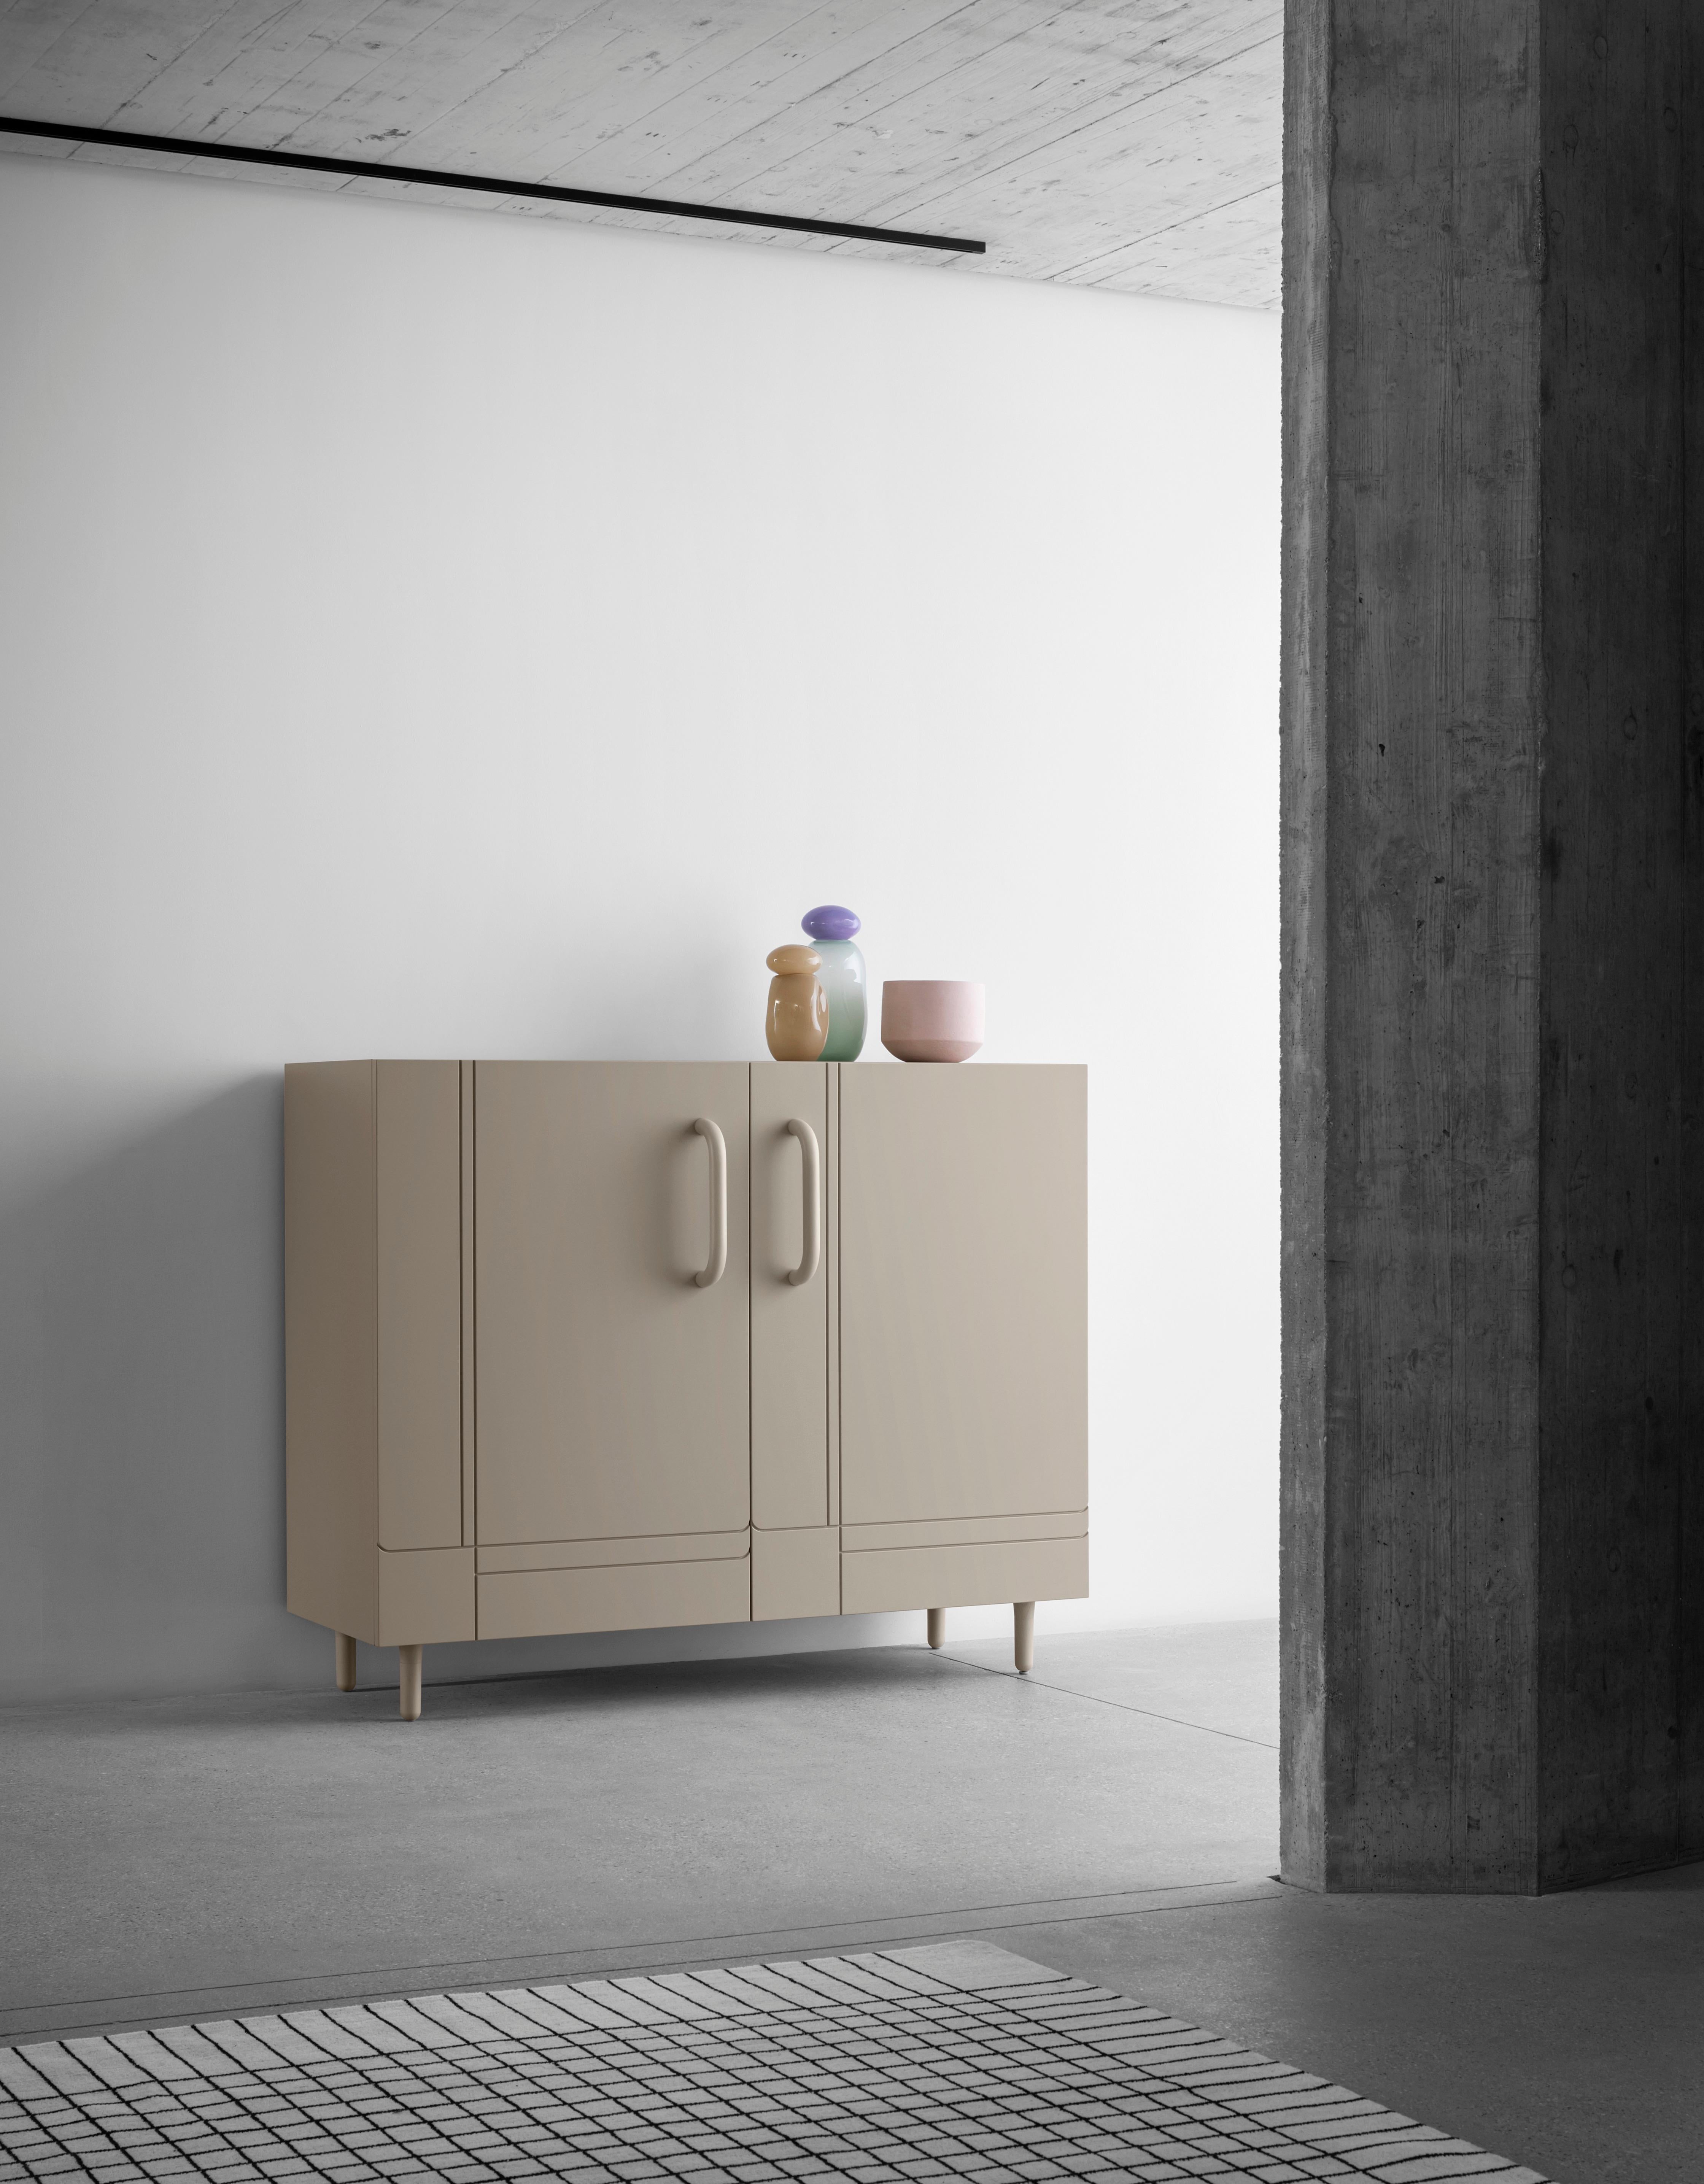 Three reasons why Dalila is the sideboard of your life: it has very thick copper handles, elegant carved lines on the doors and is wider than the Mary Poppins bag. In short, it is special.

Vertical or horizontal sideboard, entirely lacquered.